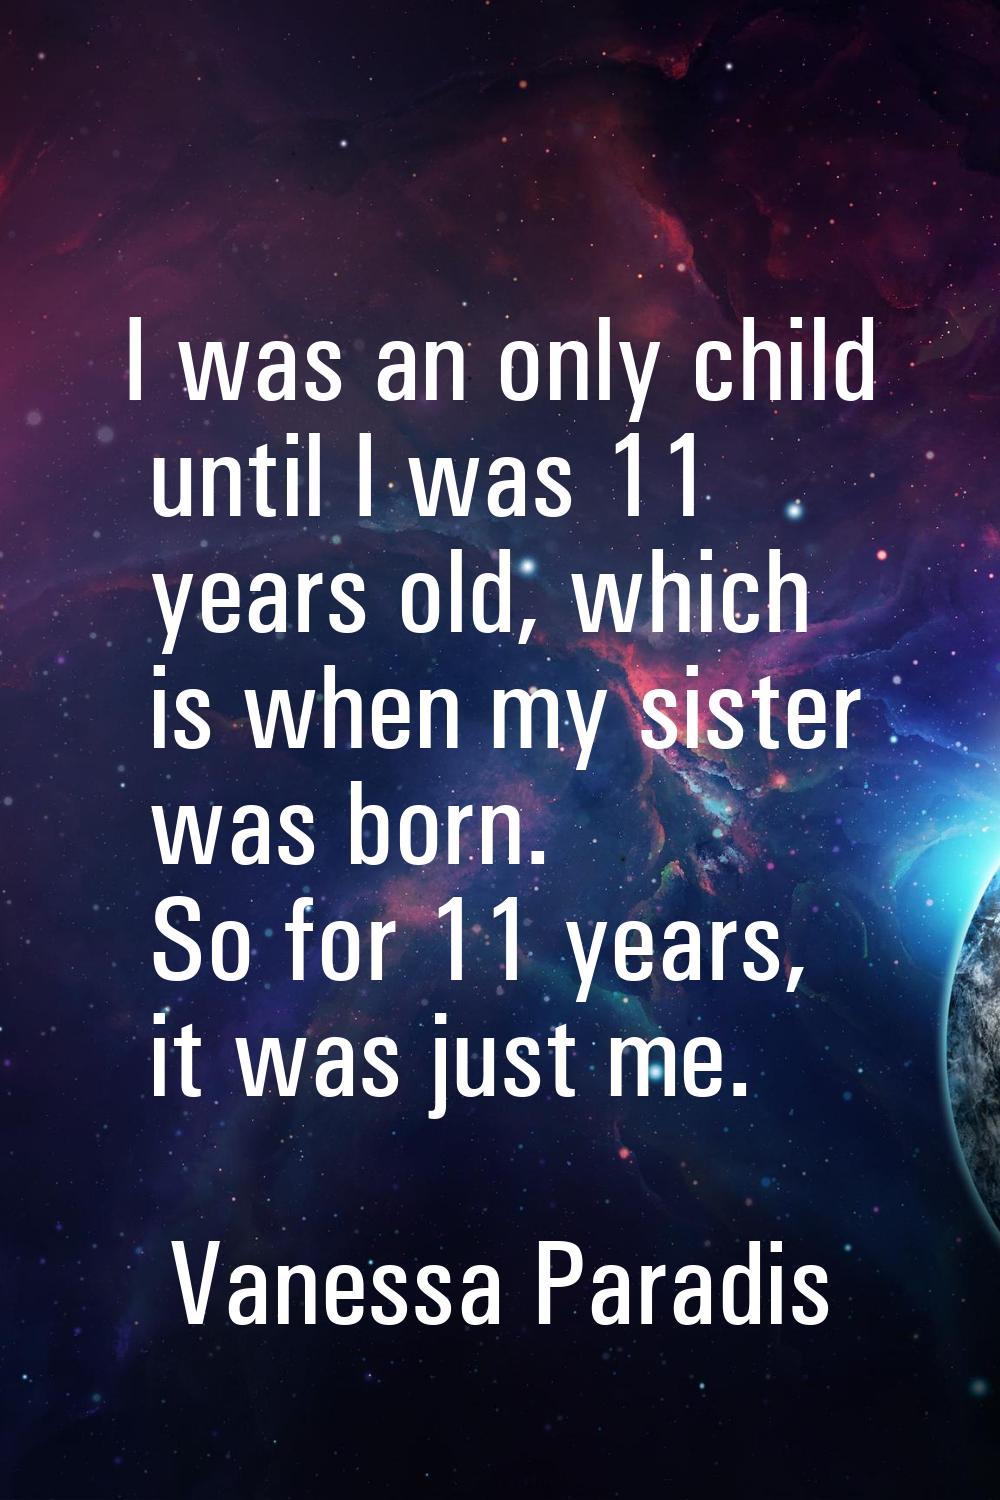 I was an only child until I was 11 years old, which is when my sister was born. So for 11 years, it